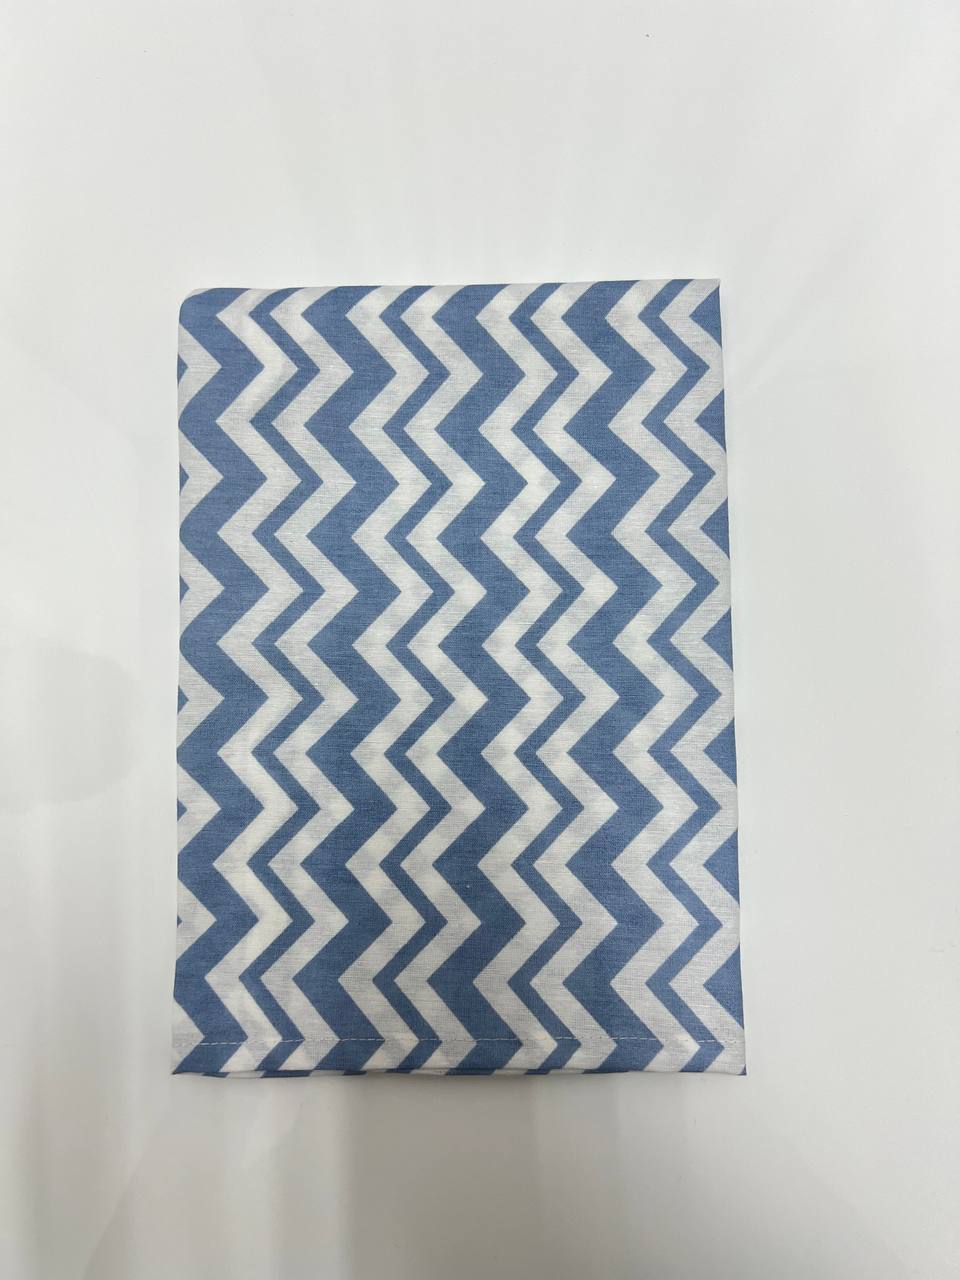 Patterned Napkin - Blue and White